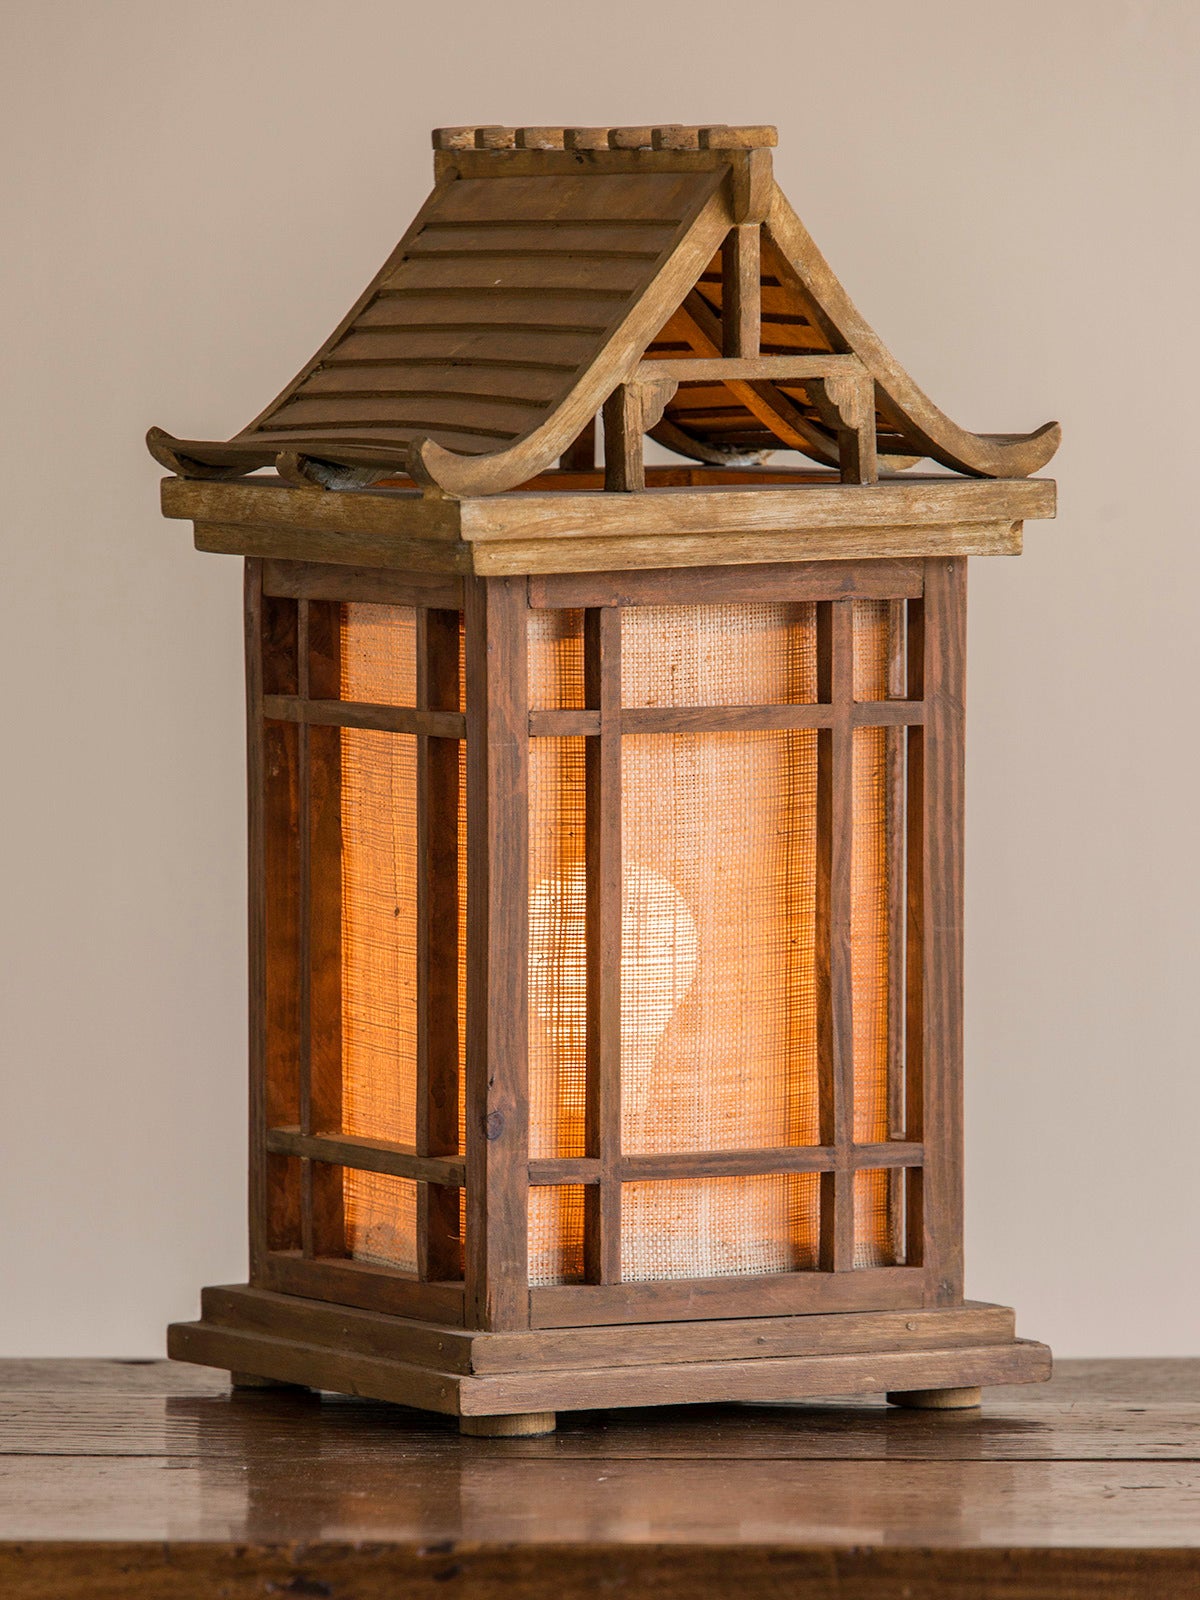 Receive our new selections direct from 1stdibs by email each week. Please click on “Follow Dealer” button below and see them first!

Vintage wooden house, Japan circa 1930, fitted as a lamp. This traditional domestic structure is created entirely